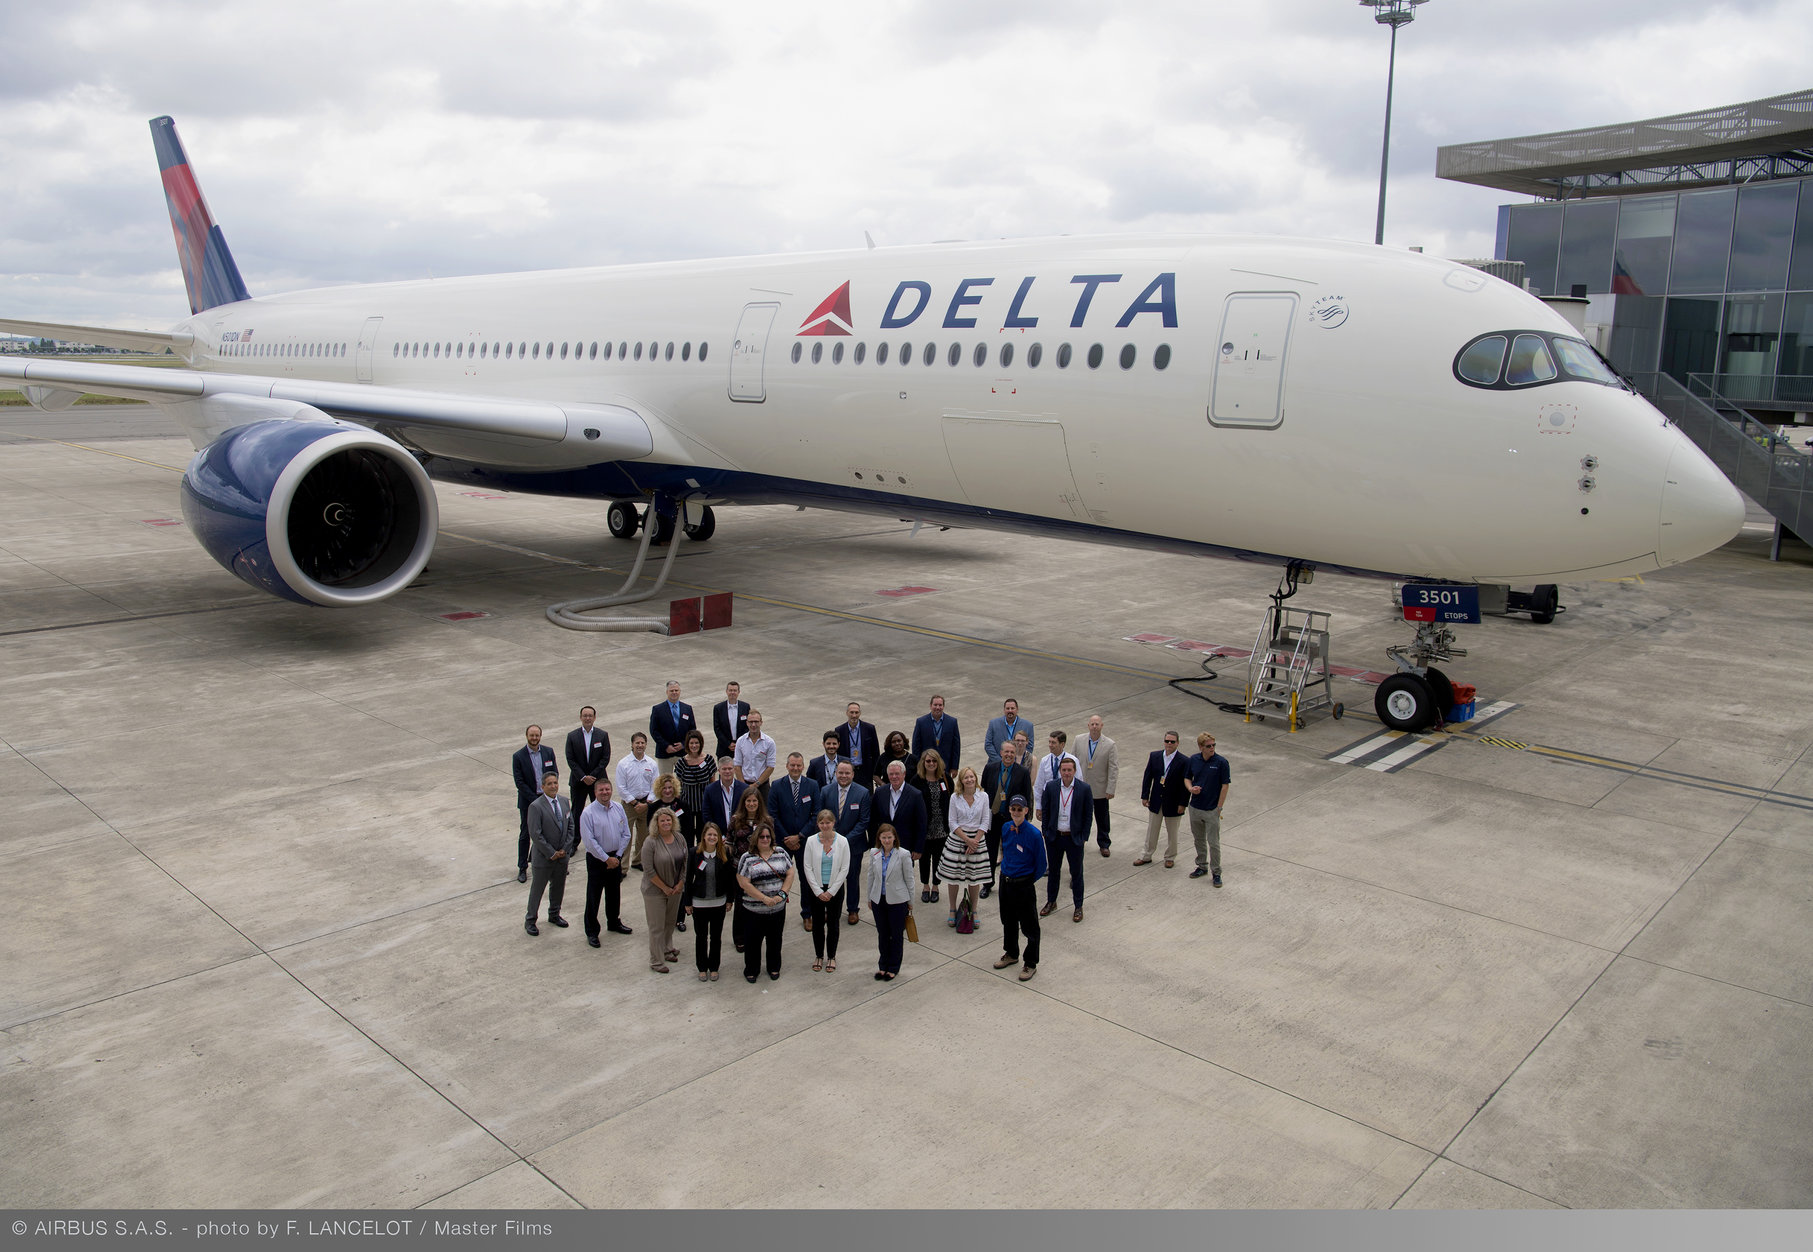 Delta Takes Delivery Of First Flagship Airbus A350 900 Delta News Hub